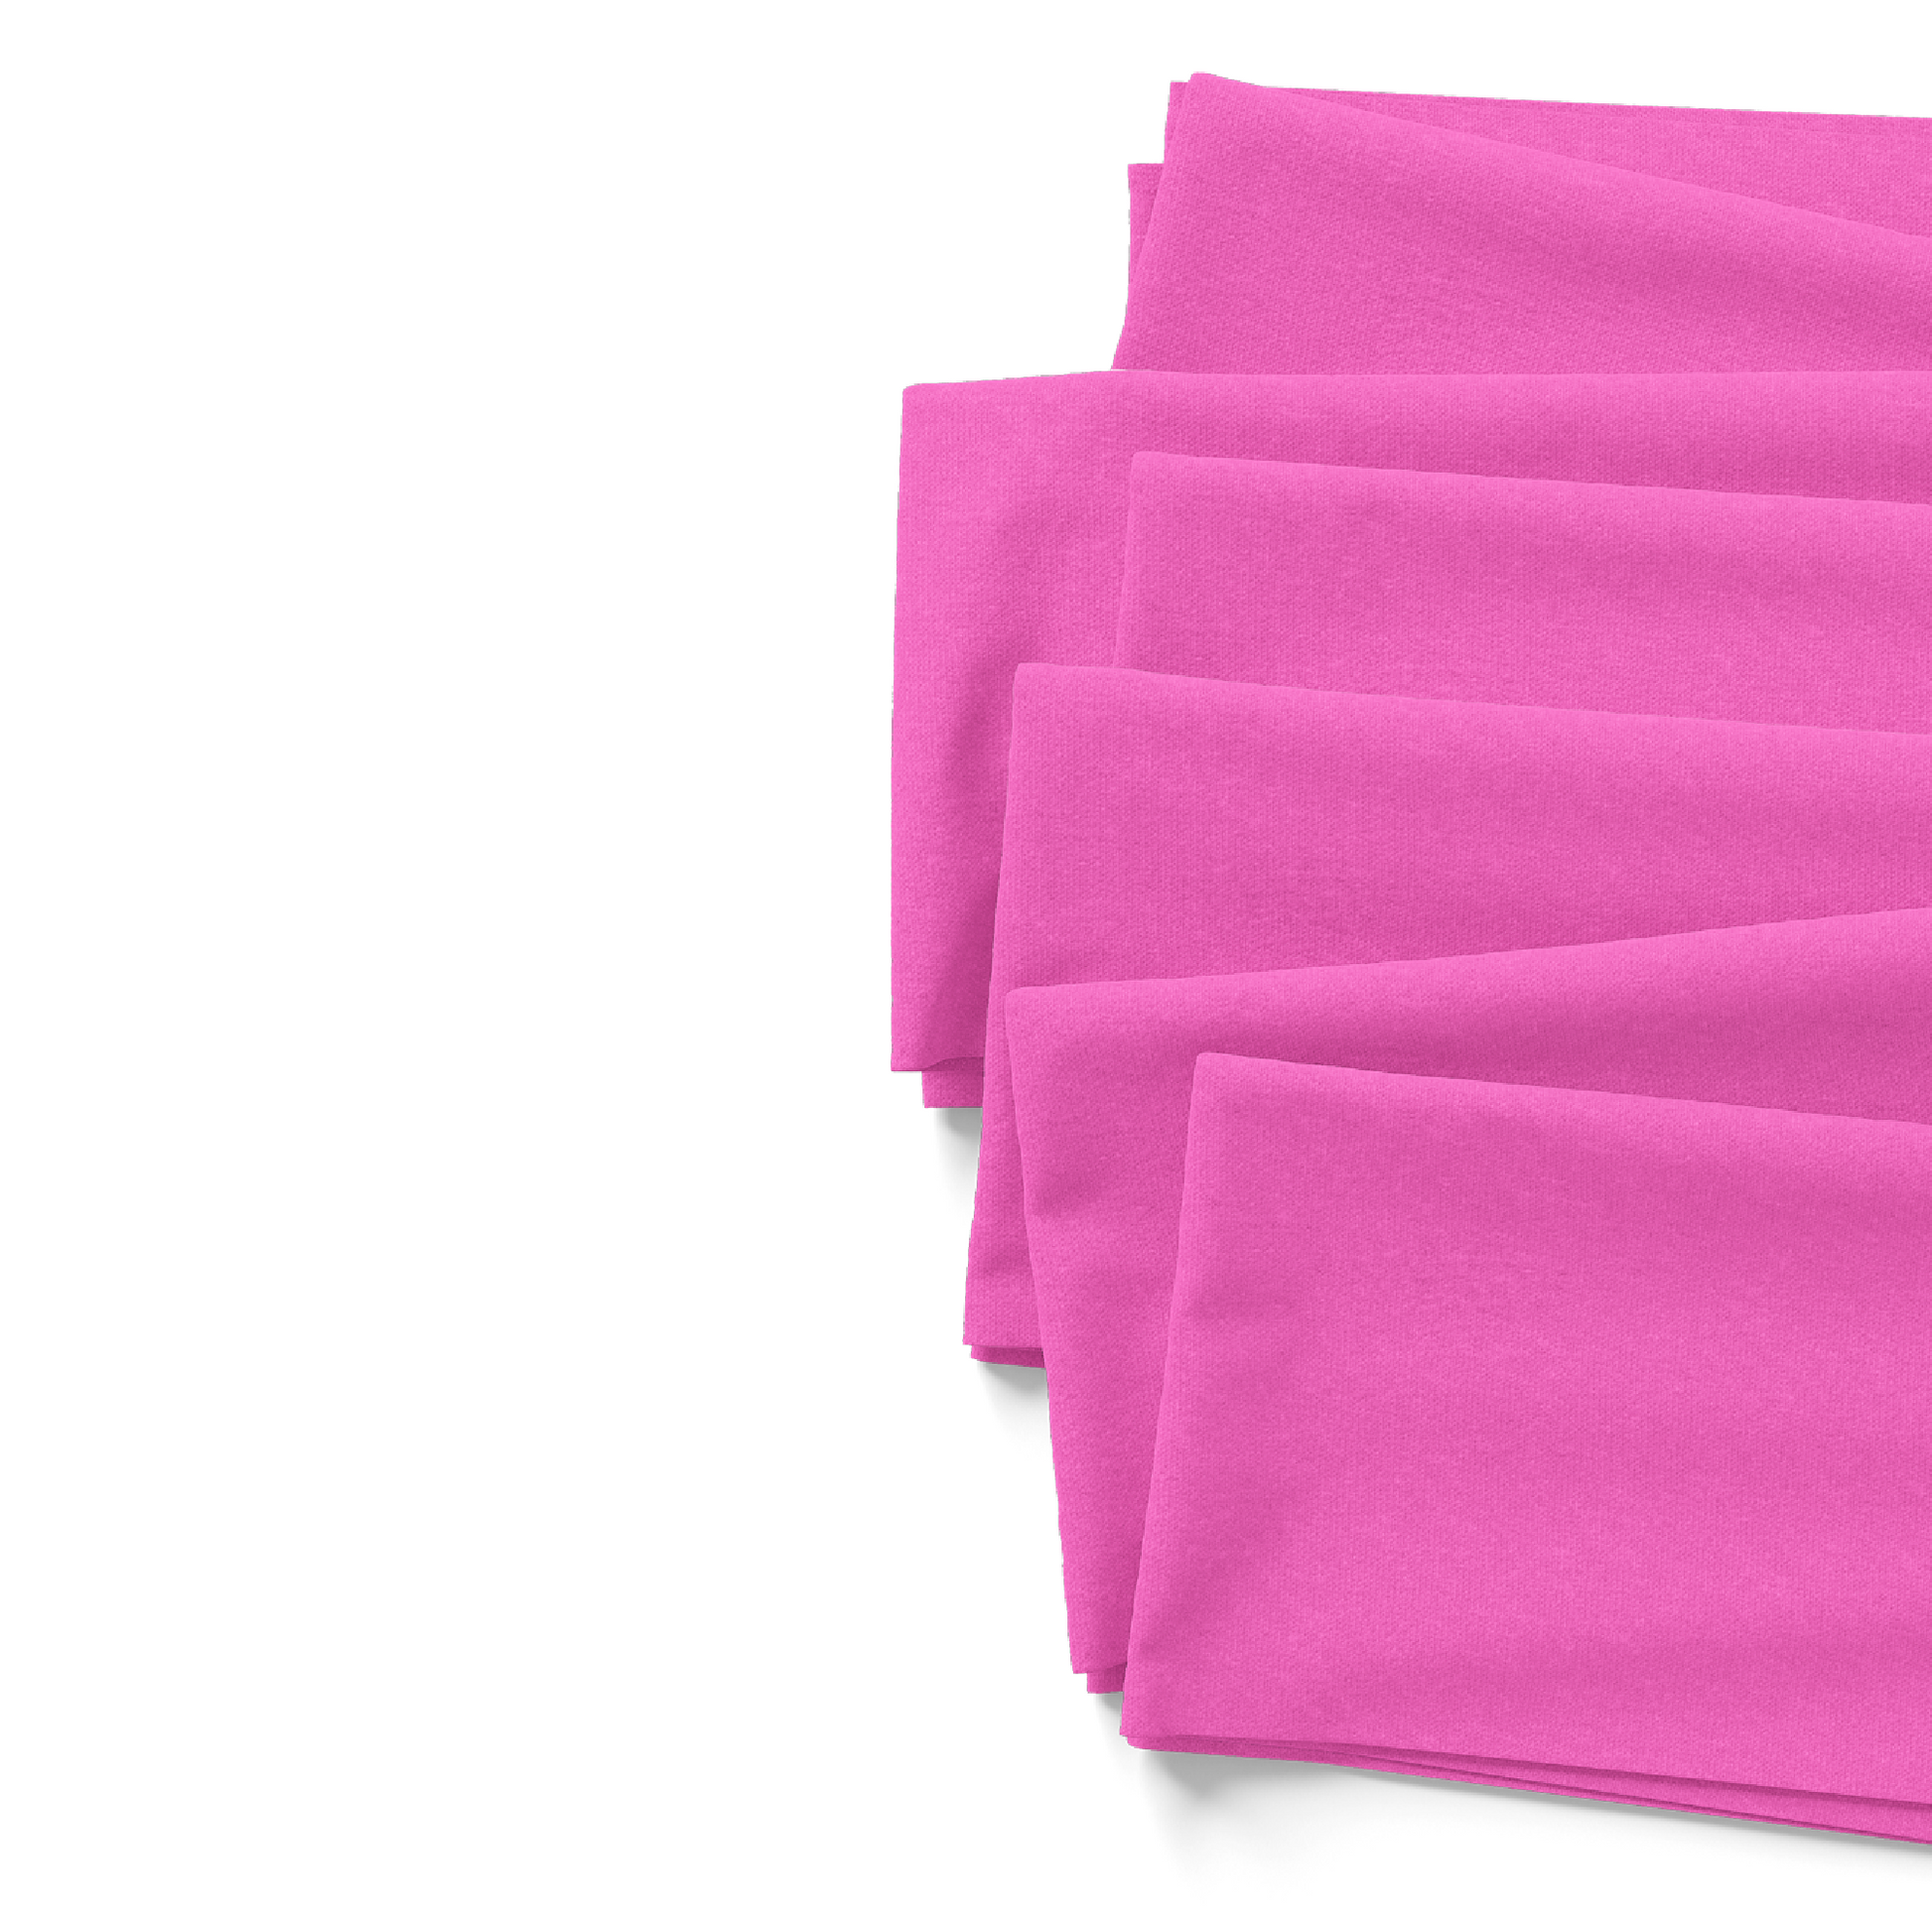 Liverpool, Ribbed, DBP, Polyester, and Neoprene solid Spring fabric by the yard in Magenta.